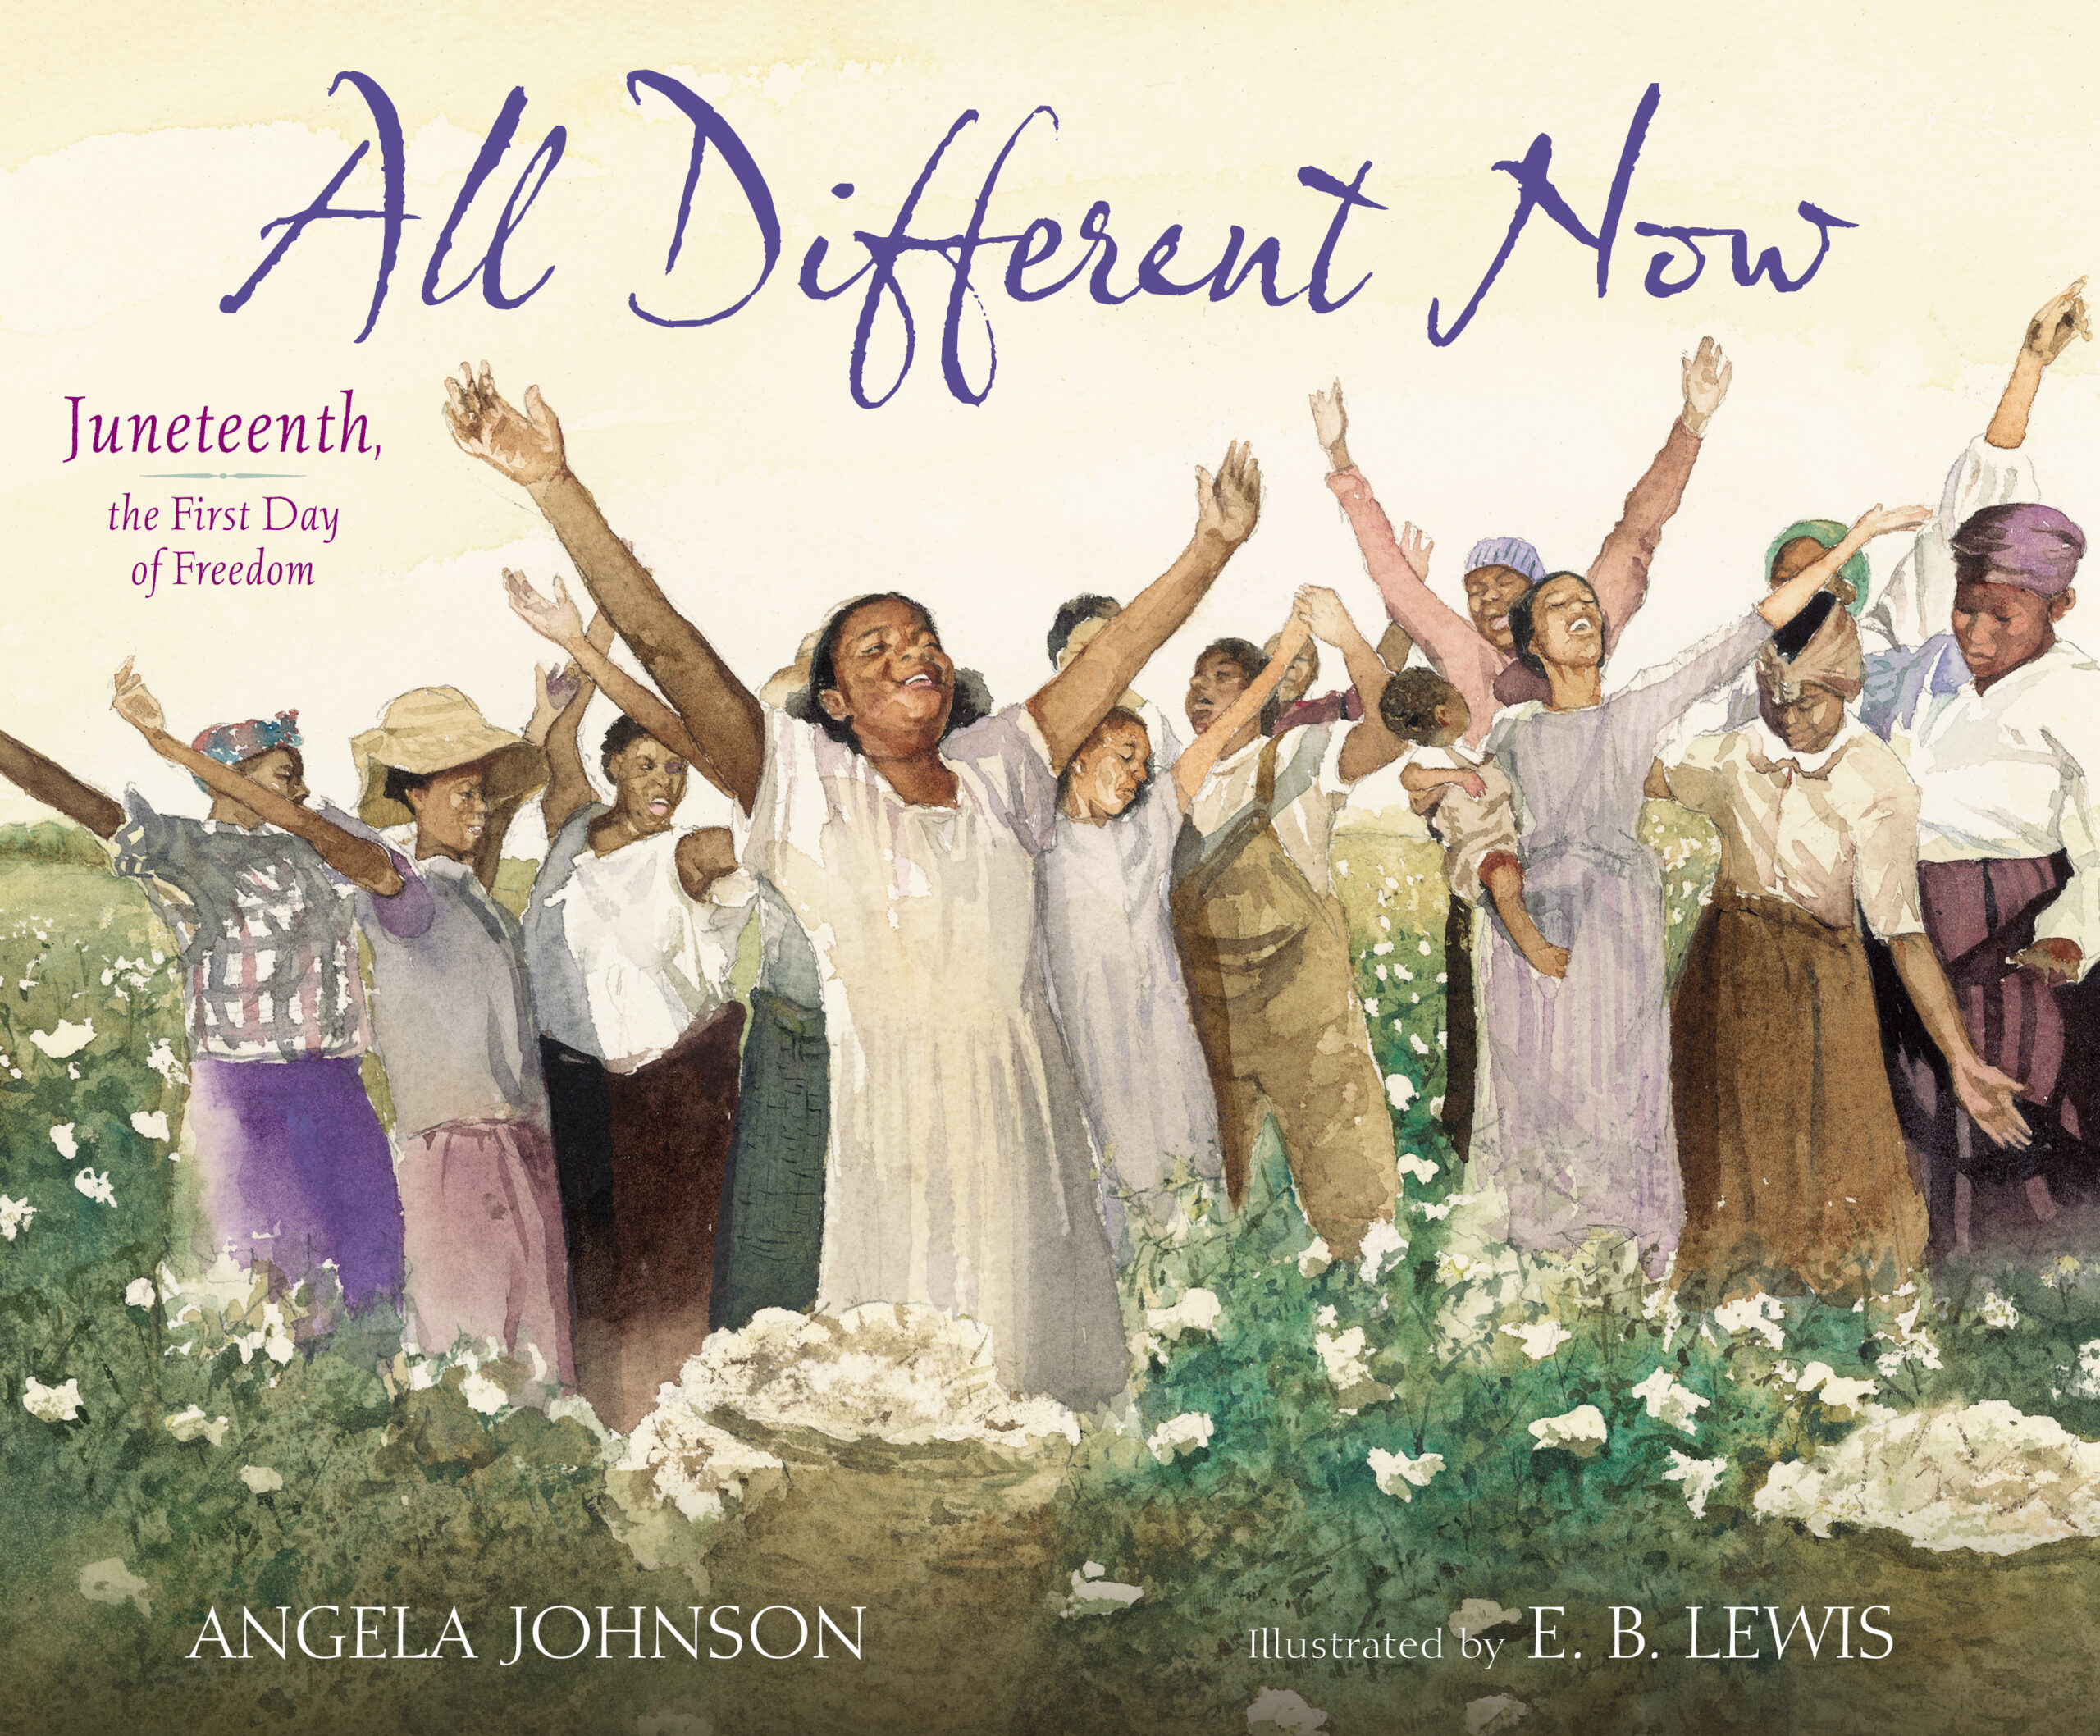 All Different Now Book for Juneteenth Education